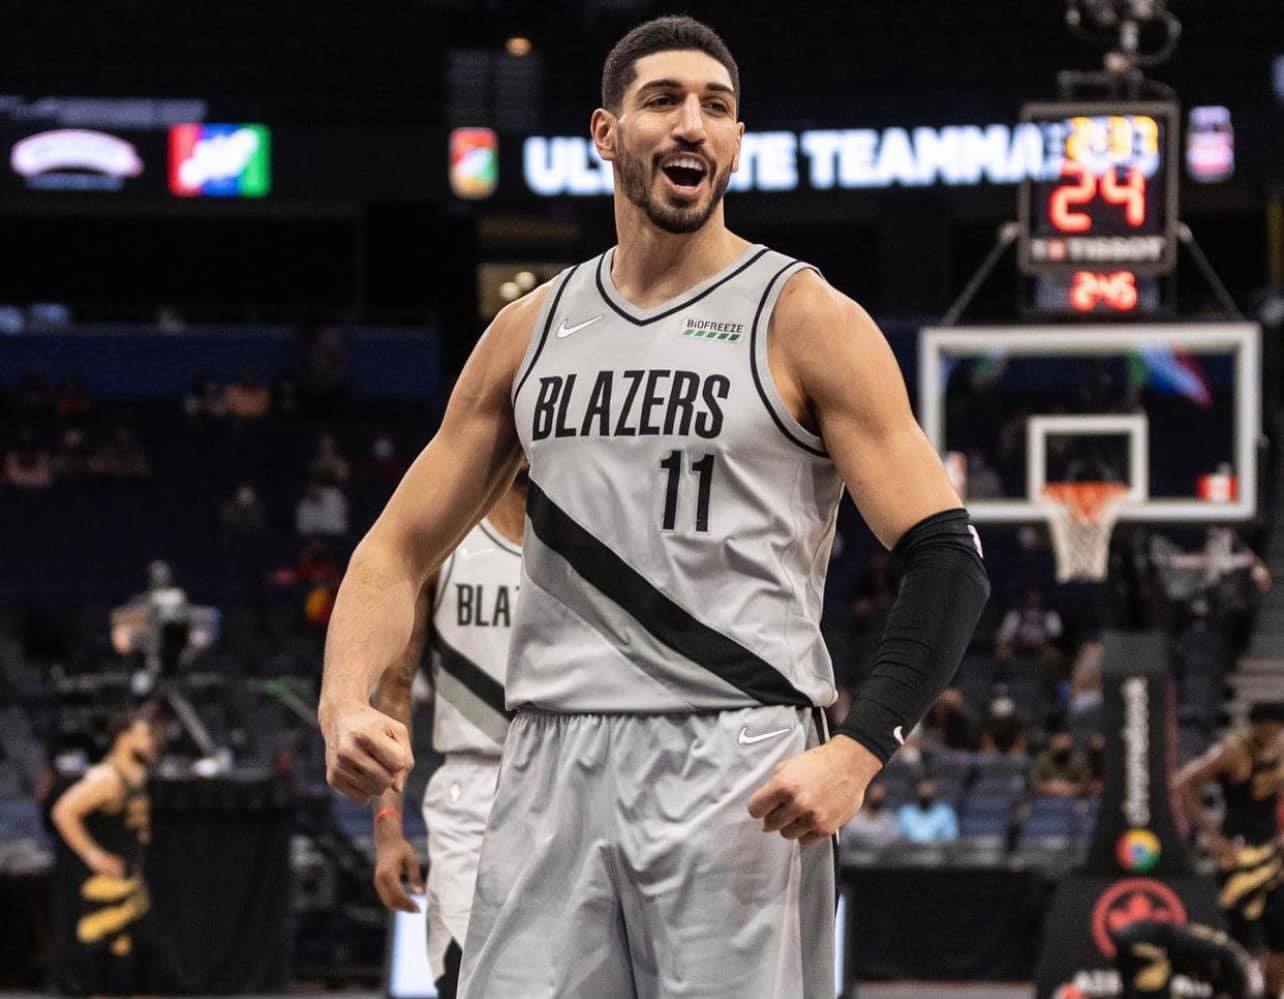 Turkey issued 9 arrest warrants for NBA star Kanter, official records reveal 1